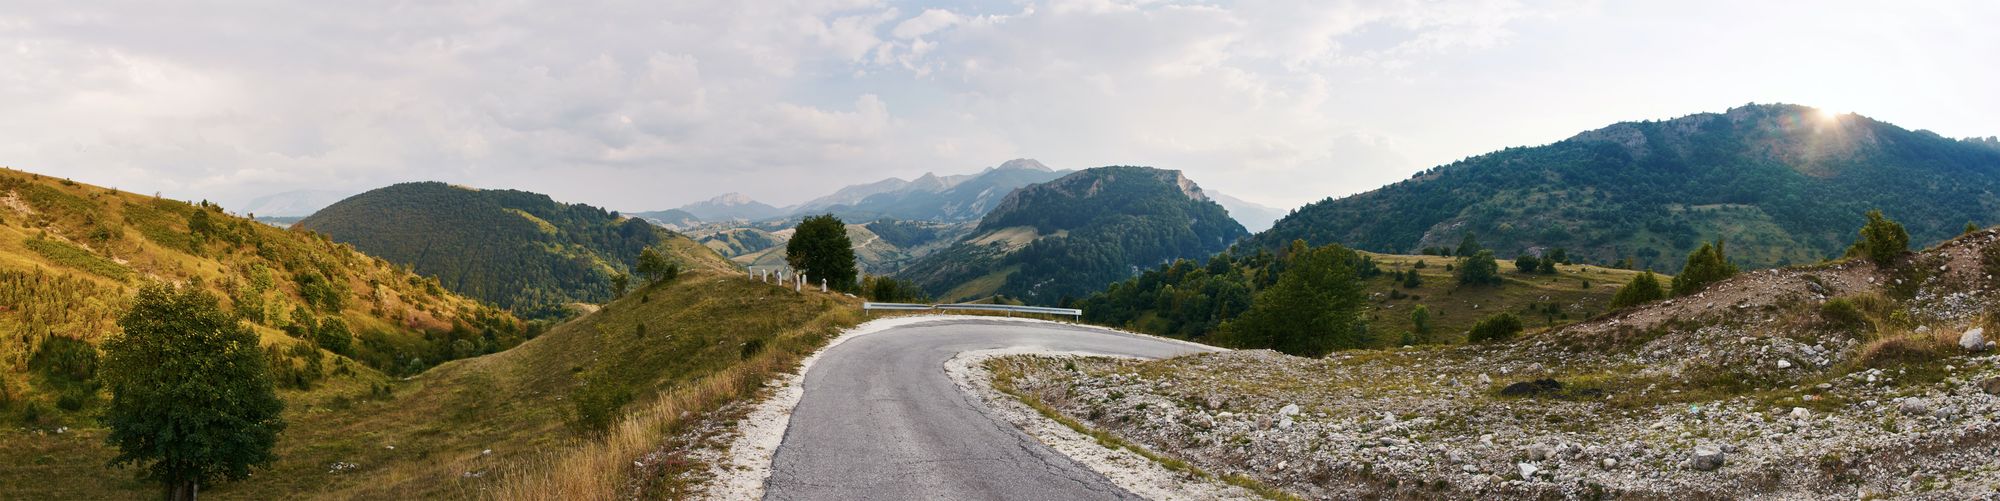 A curving road in Umoljani, Bosnia, backdropped by mountains.